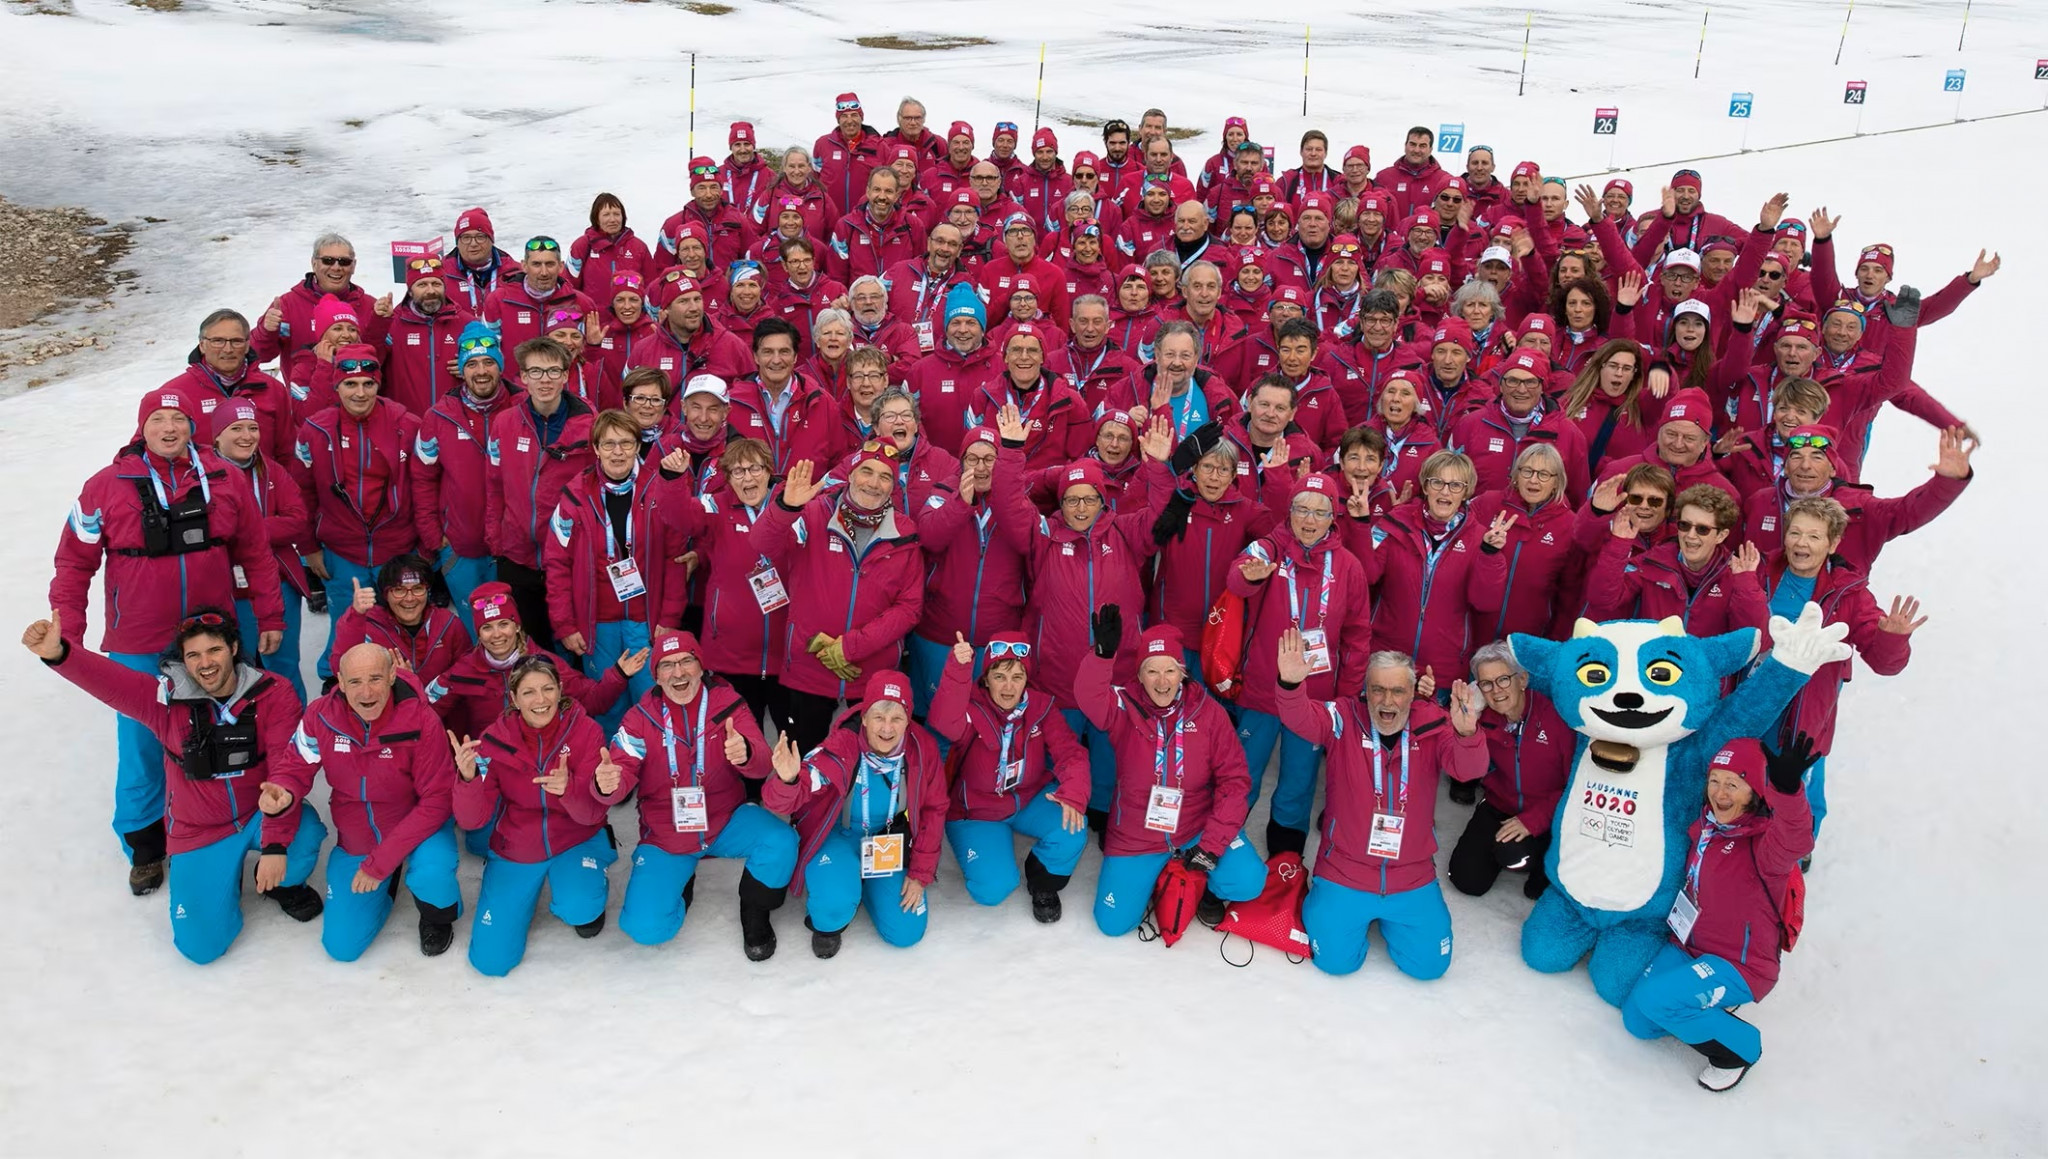 A total of 2,000 volunteers are being sought for next year's Winter Youth Olympic Games in Gangwon ©IOC